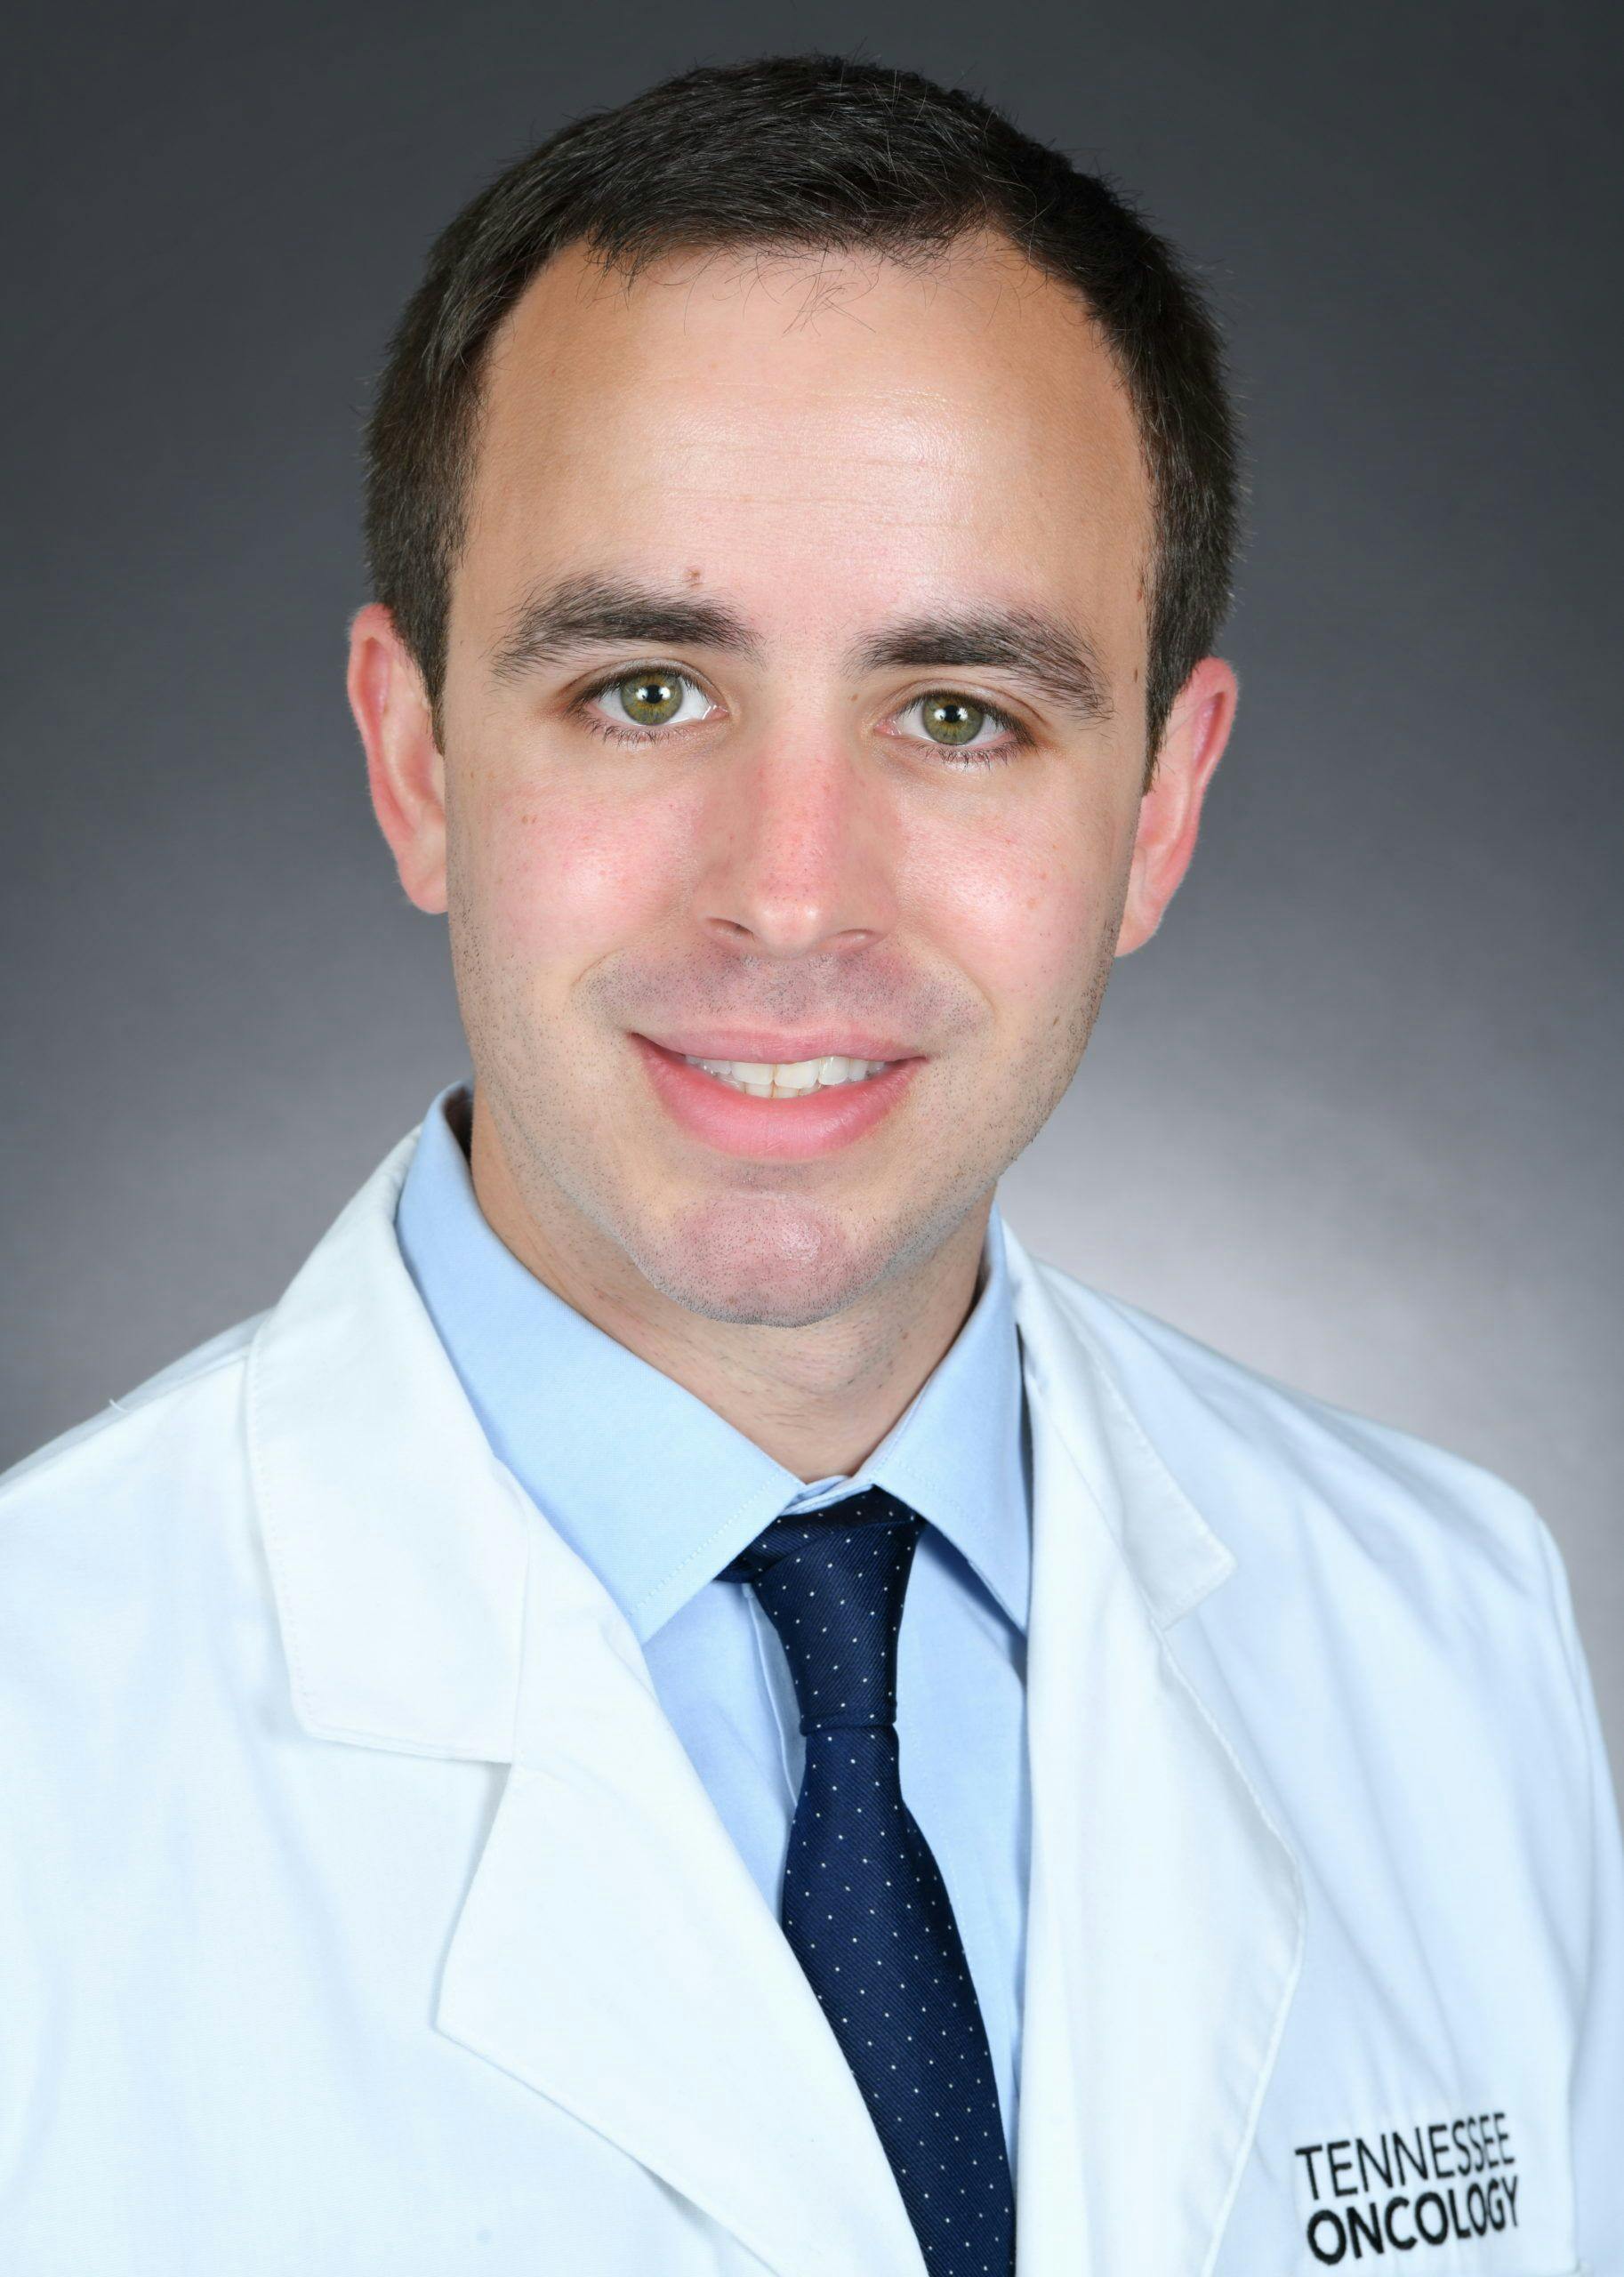 Benjamin Garmezy, MD

Assistant Director of Genitourinary Research 

Sarah Cannon Research Institute at Tennessee Oncology